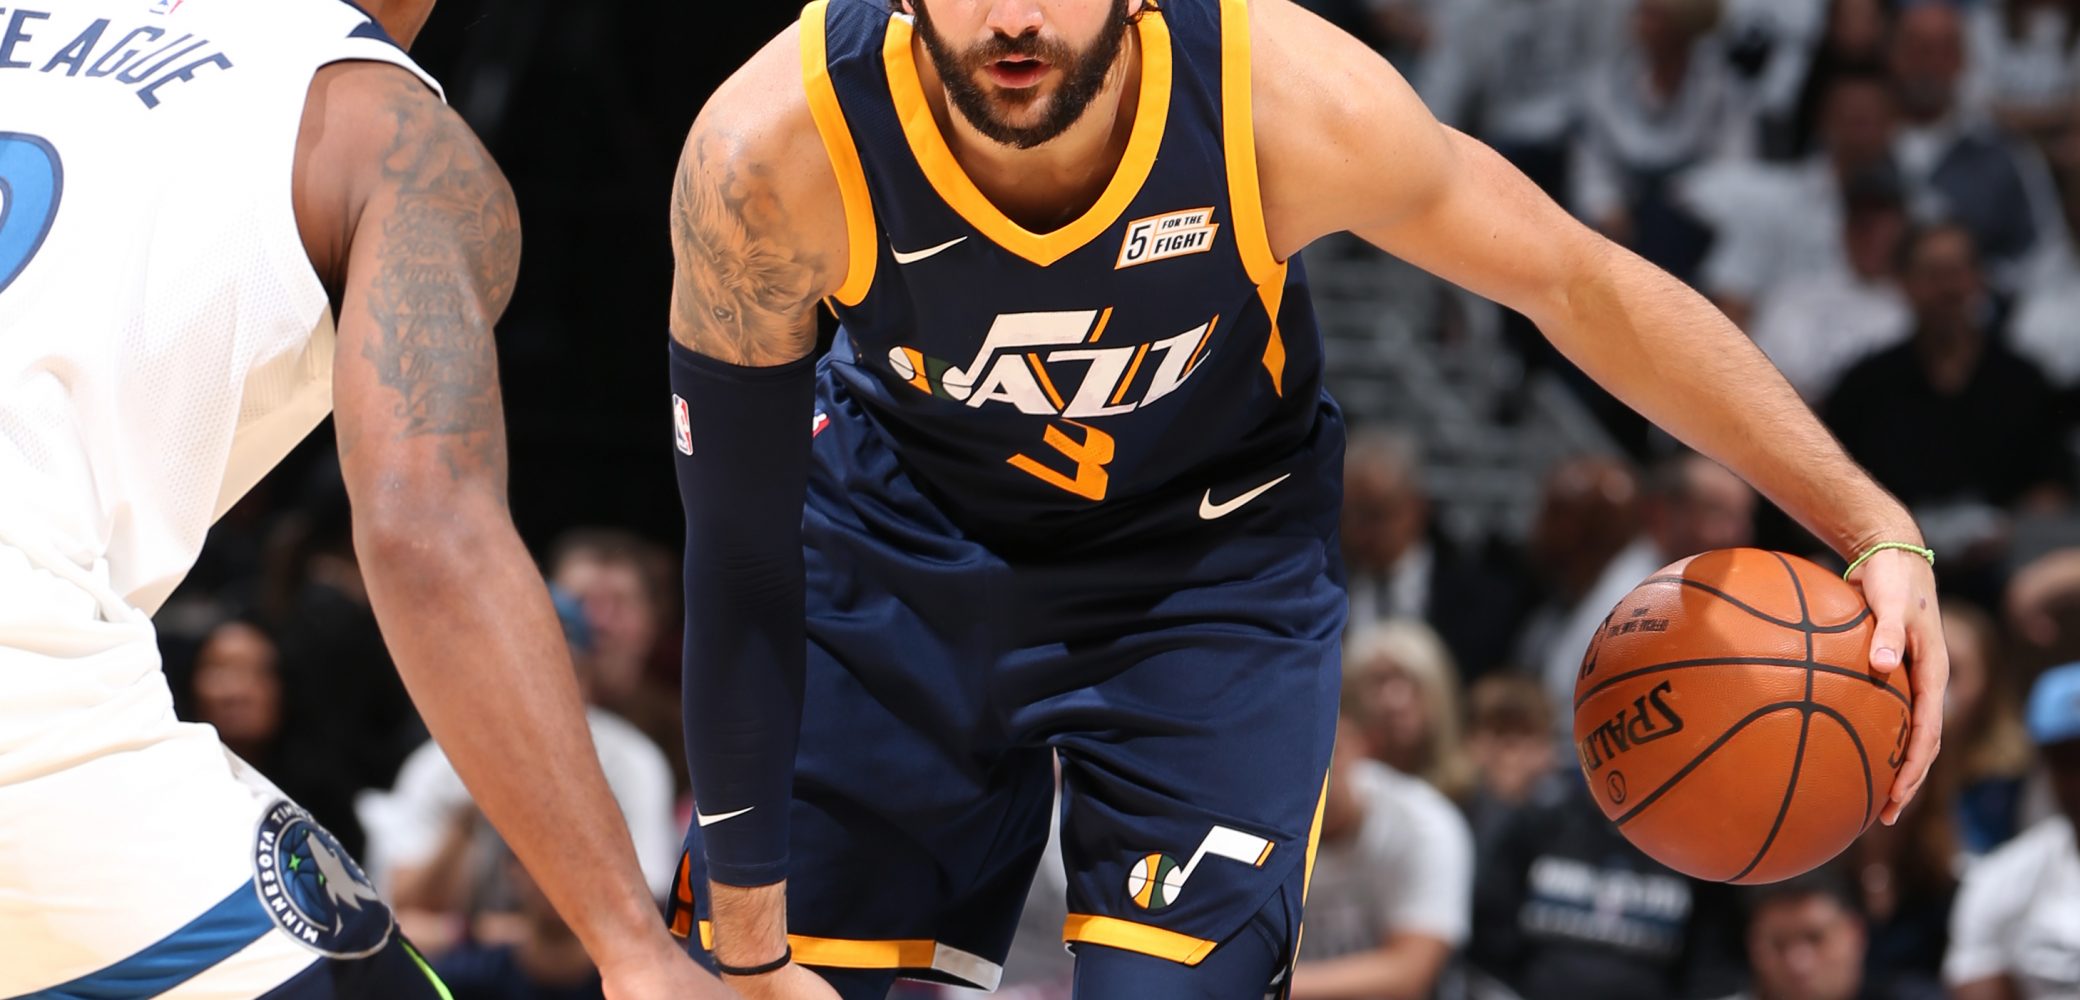 Minnesota fans welcome back Ricky Rubio with standing ovation